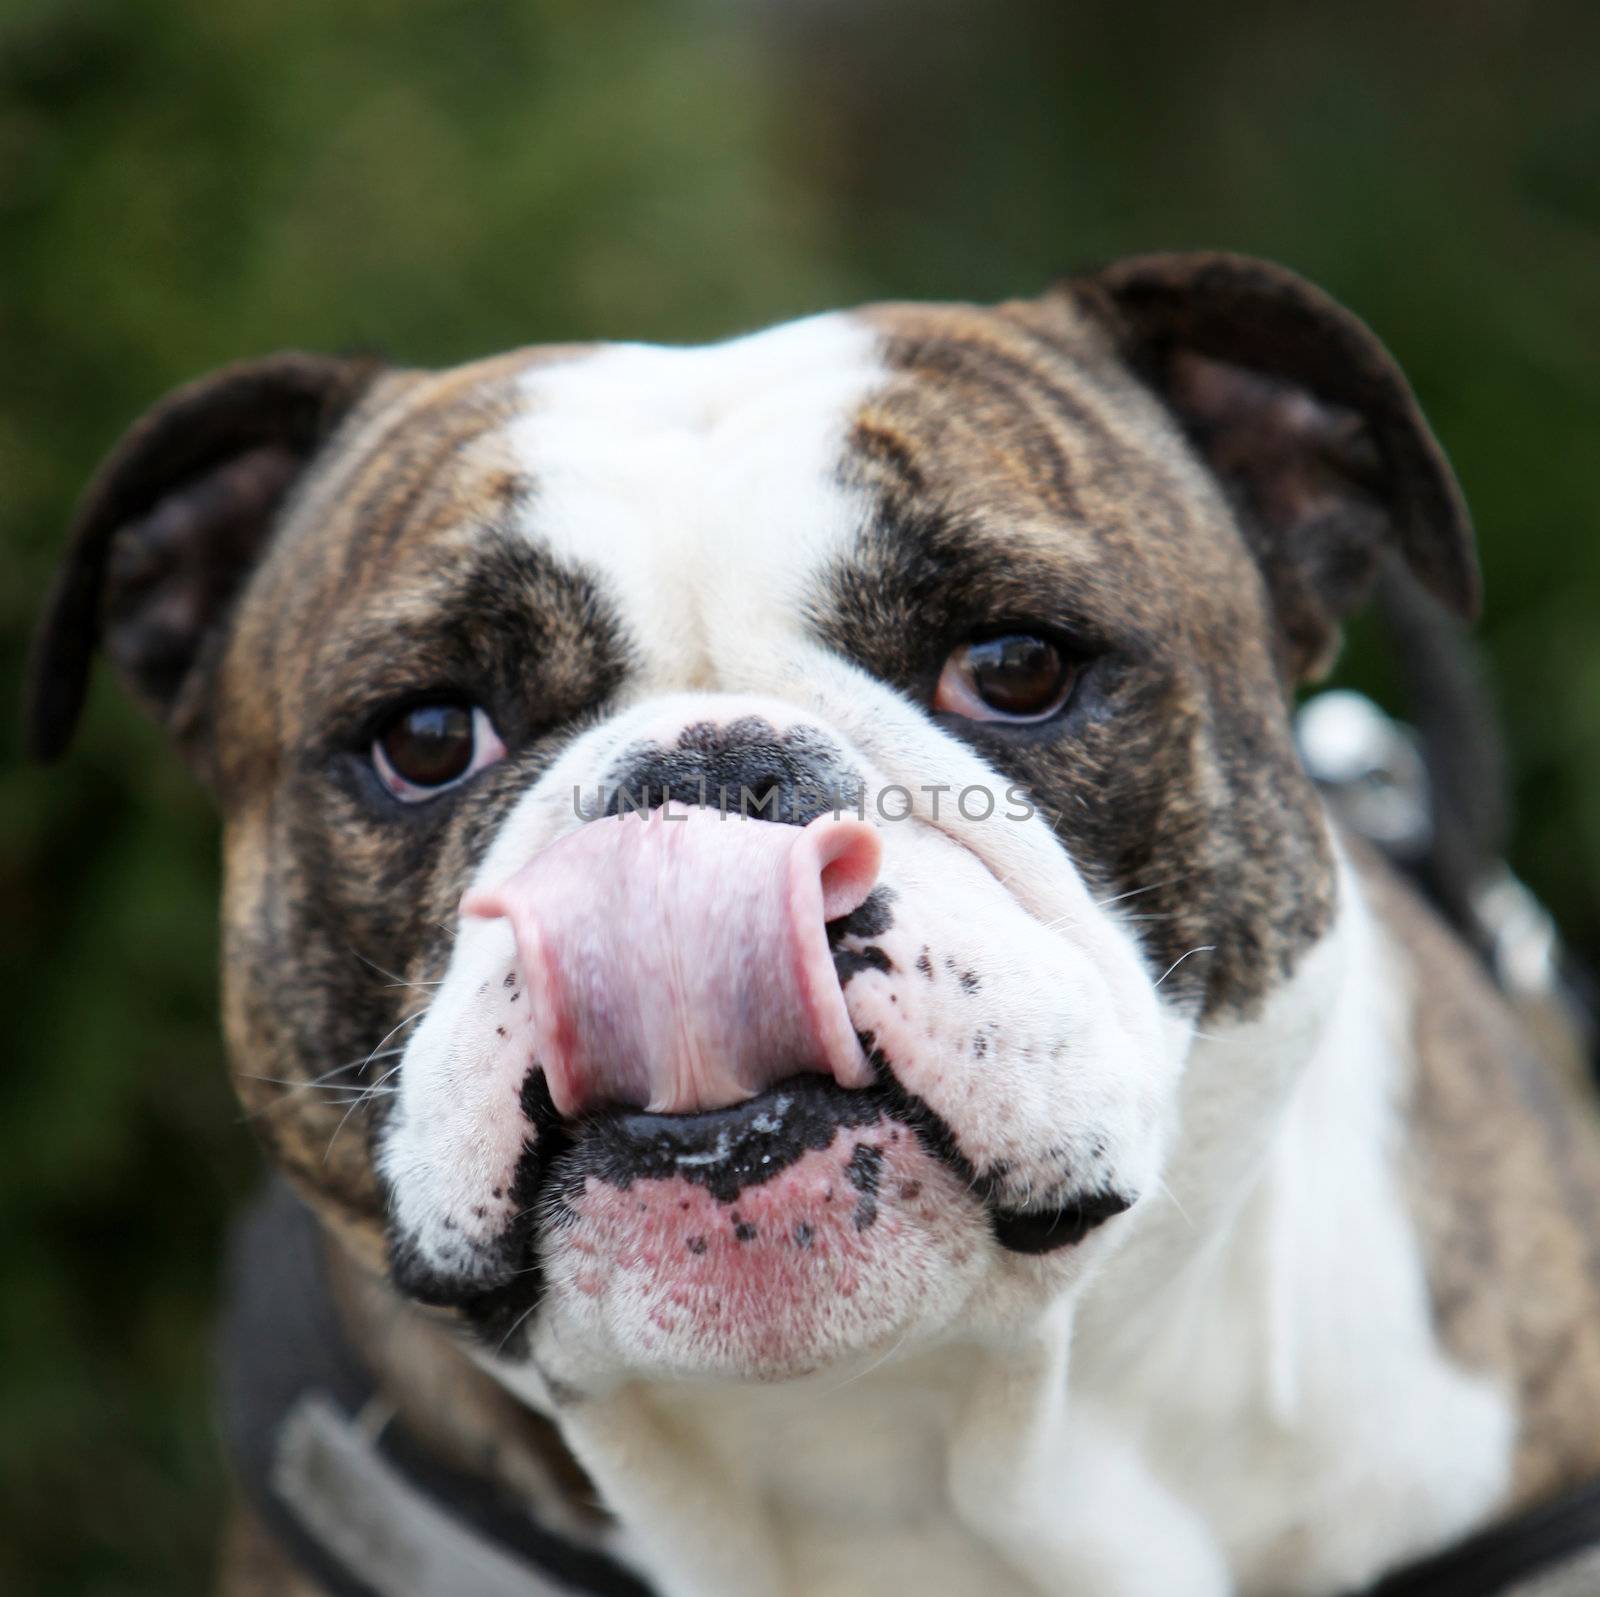 A Bulldog stretched out your tongue - Close-up